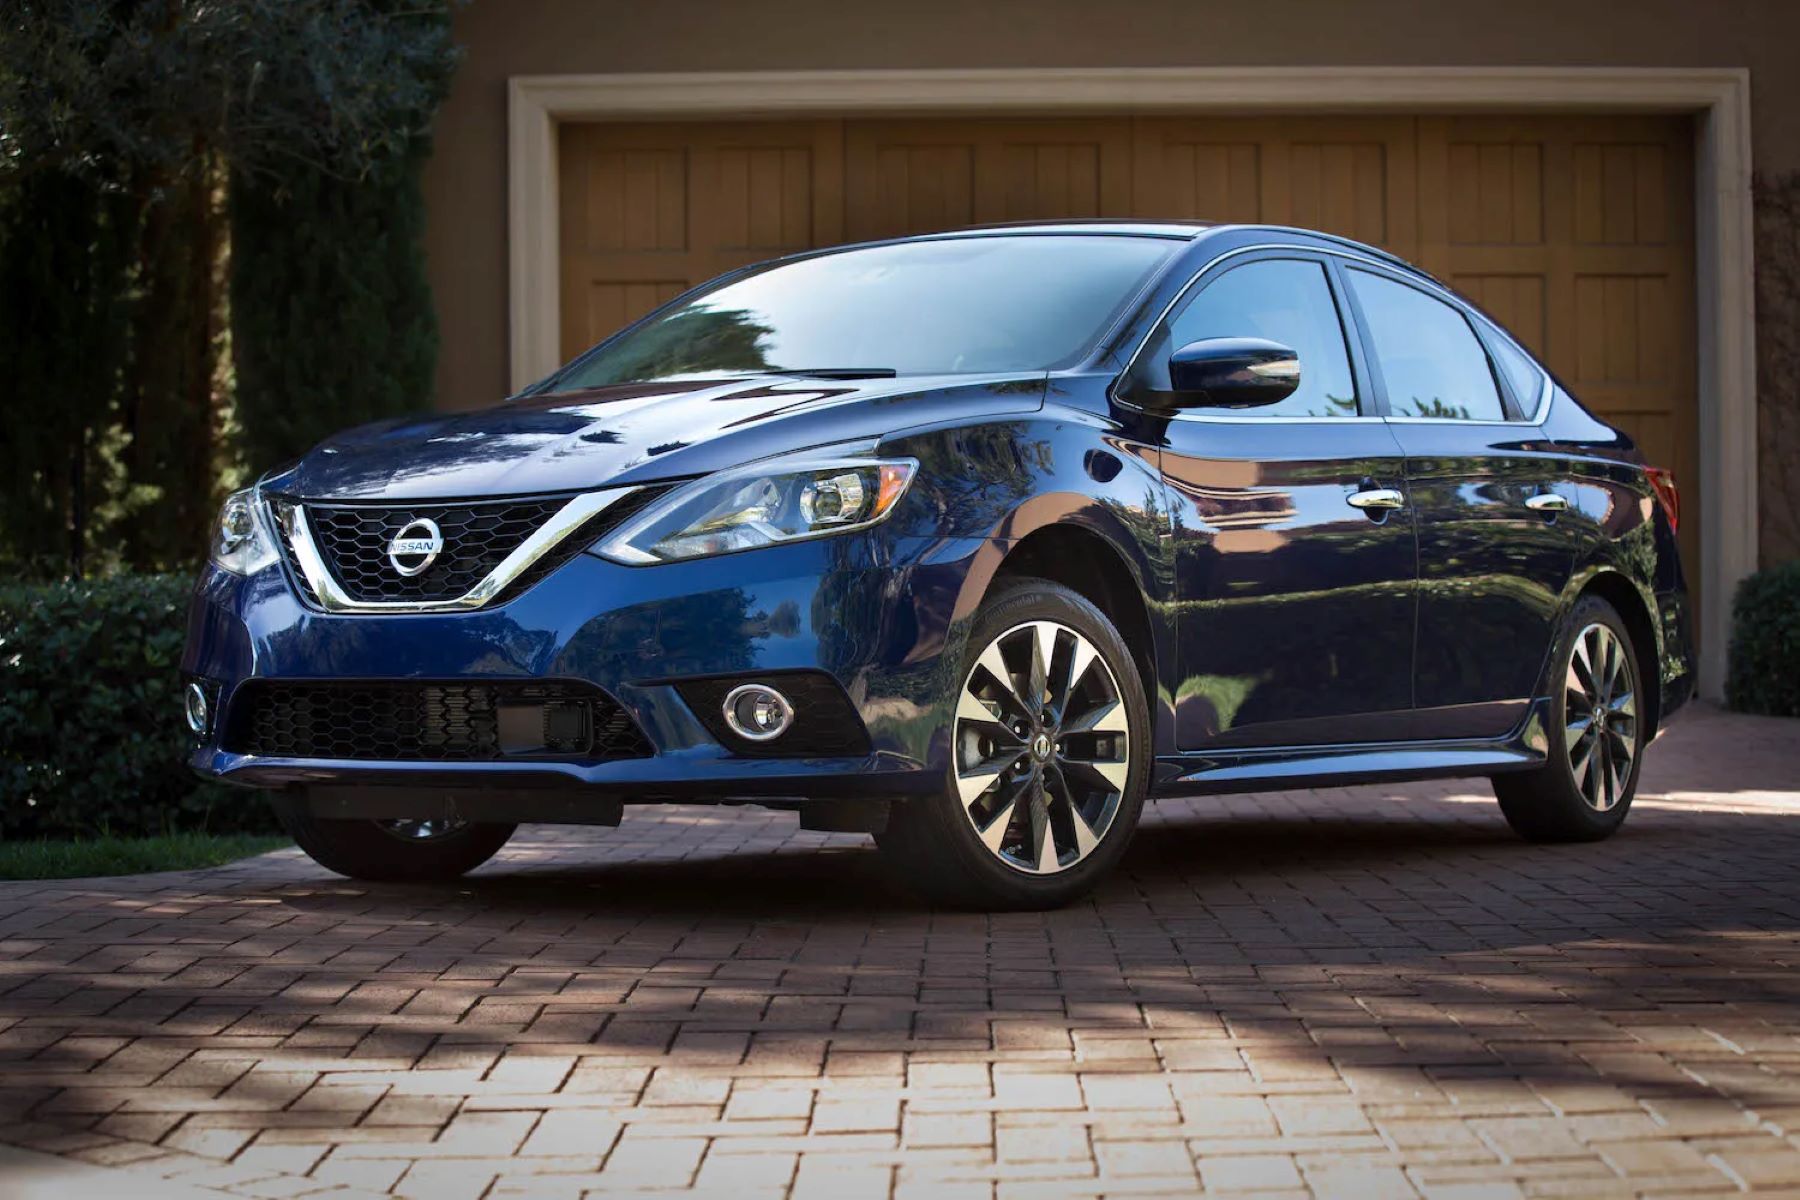 Common Concerns About CVT Problems In A 2018 Nissan Sentra: Should I Consider Trading It In?